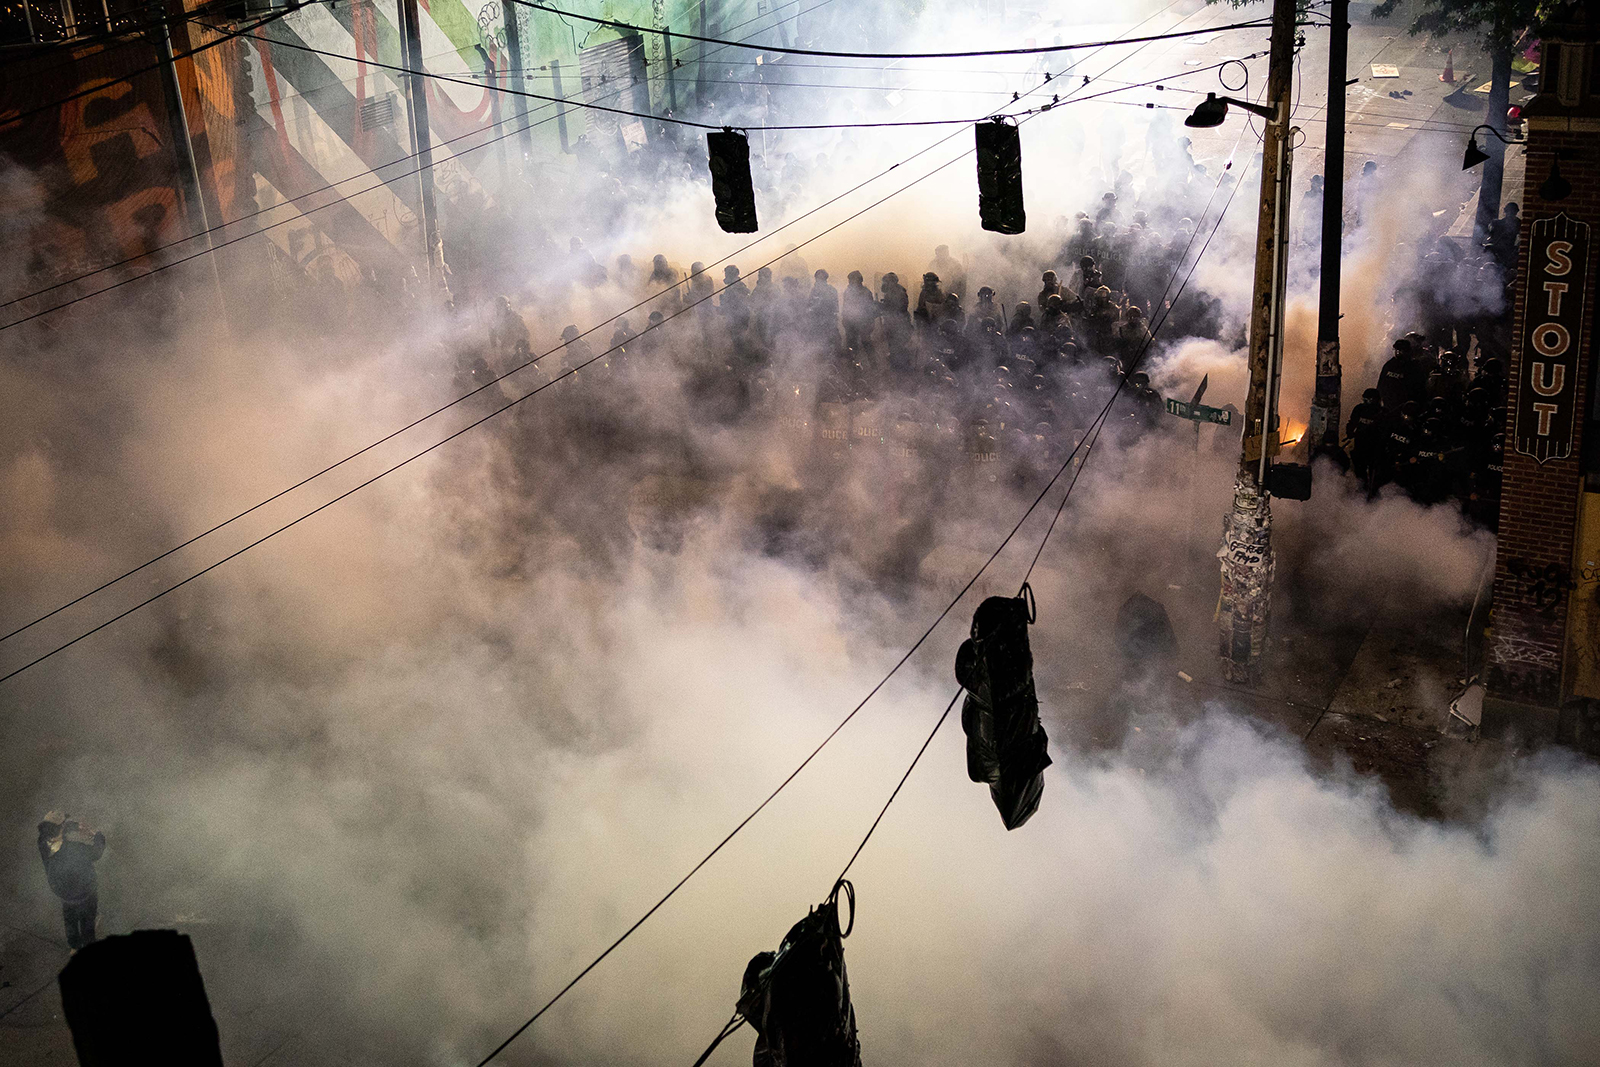 Smoke fills the air as demonstrators clash with police near the Seattle Police Departments East Precinct shortly after midnight on Monday, June 8, in Seattle.